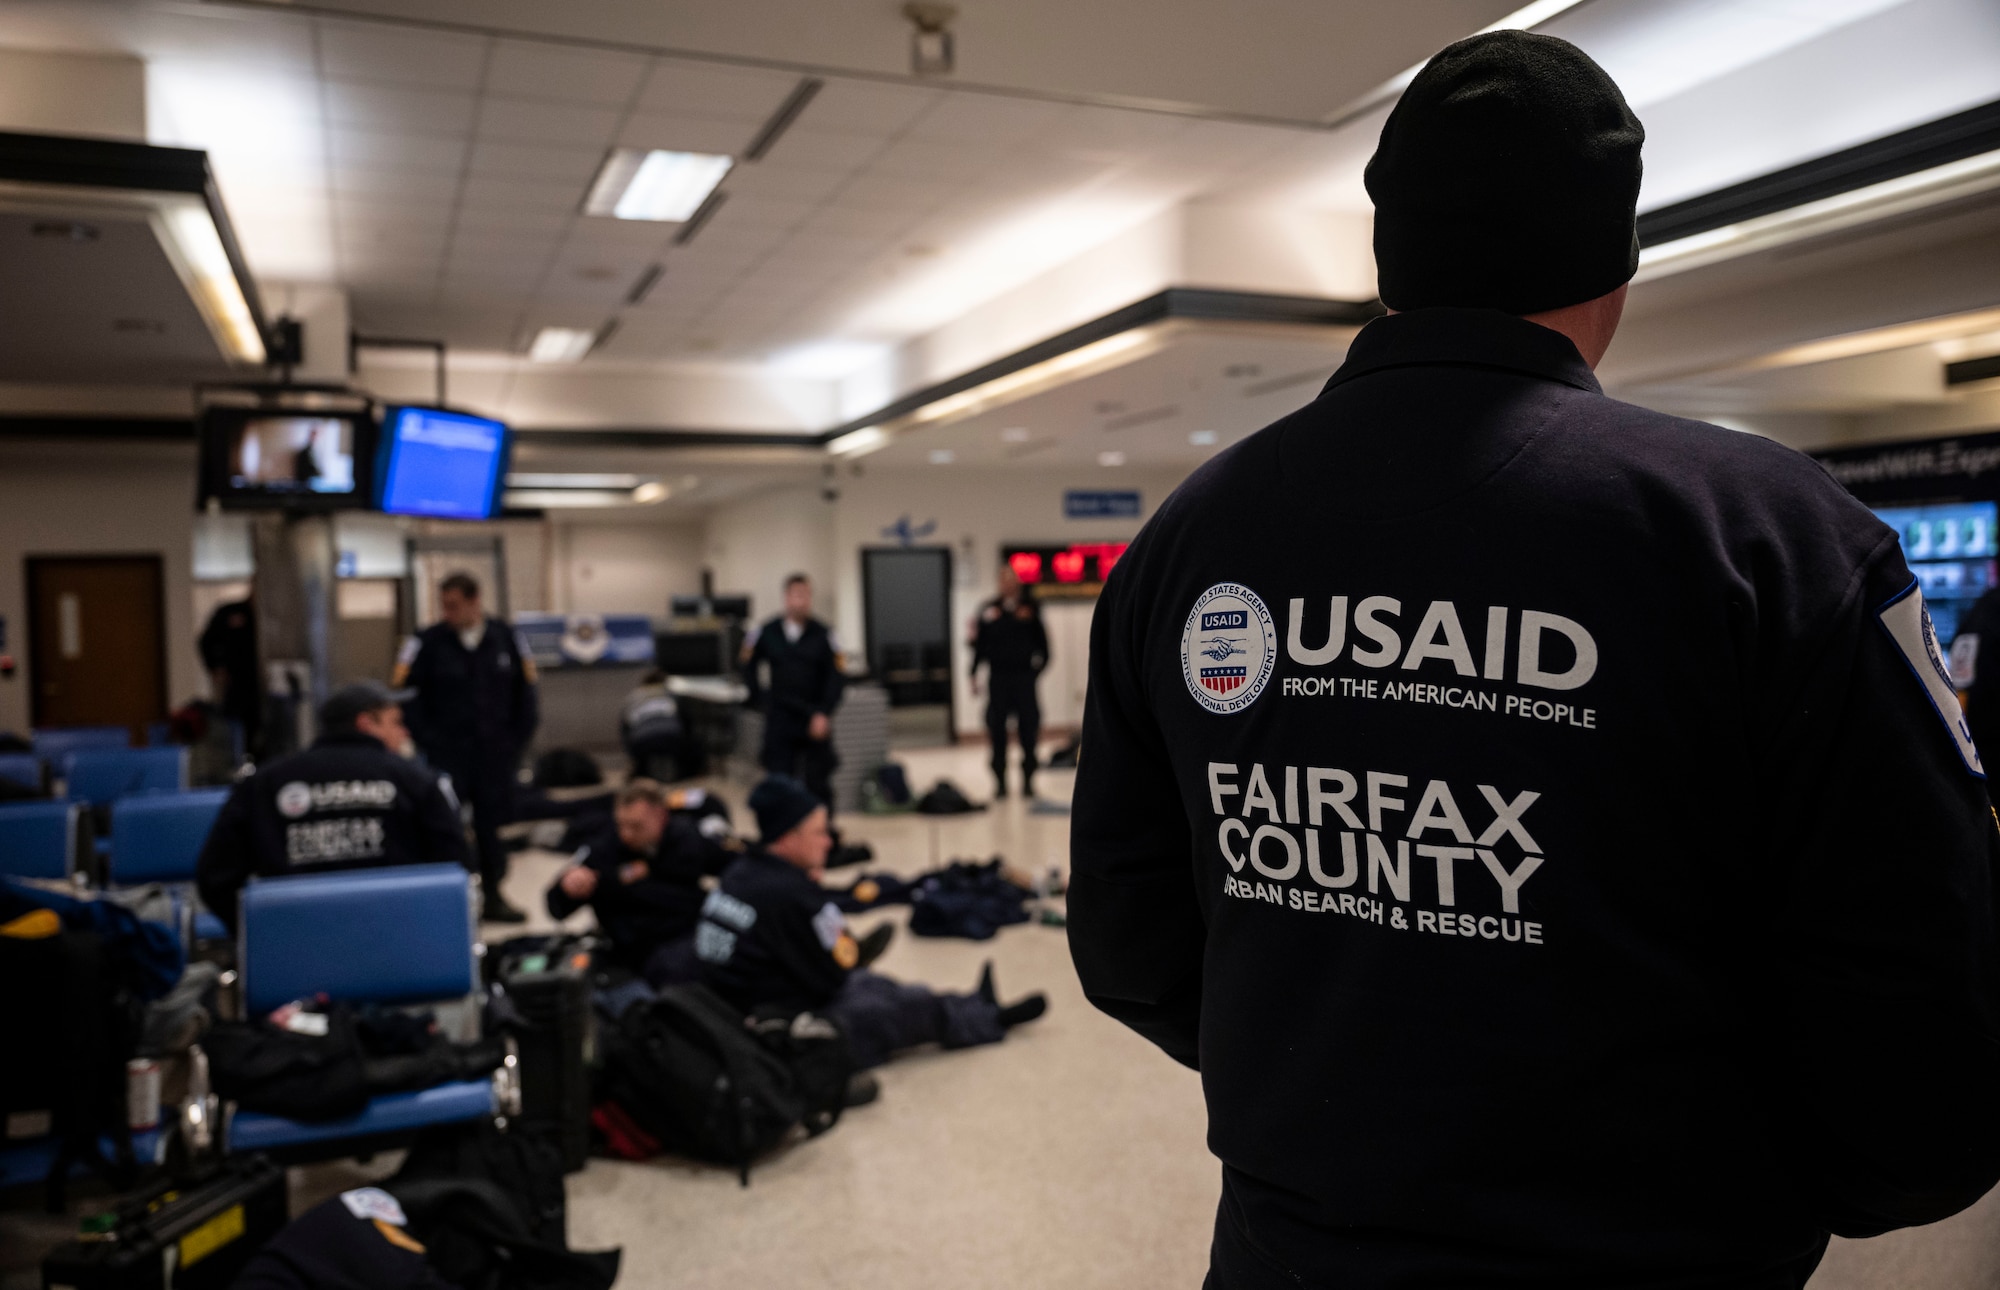 Urban Search and Rescue personnel from Fairfax County, Virginia, gather their belongings prior to boarding a C-17 Globemaster III on Dover Air Force Base, Delaware, Feb. 7, 2023. The U.S. Agency for International Development (USAID) is mobilizing emergency humanitarian assistance to respond to the devastating impacts in Türkiye following the worst earthquake to hit the region in almost a century. (U.S. Air Force photo by Staff Sgt. Marco A. Gomez)